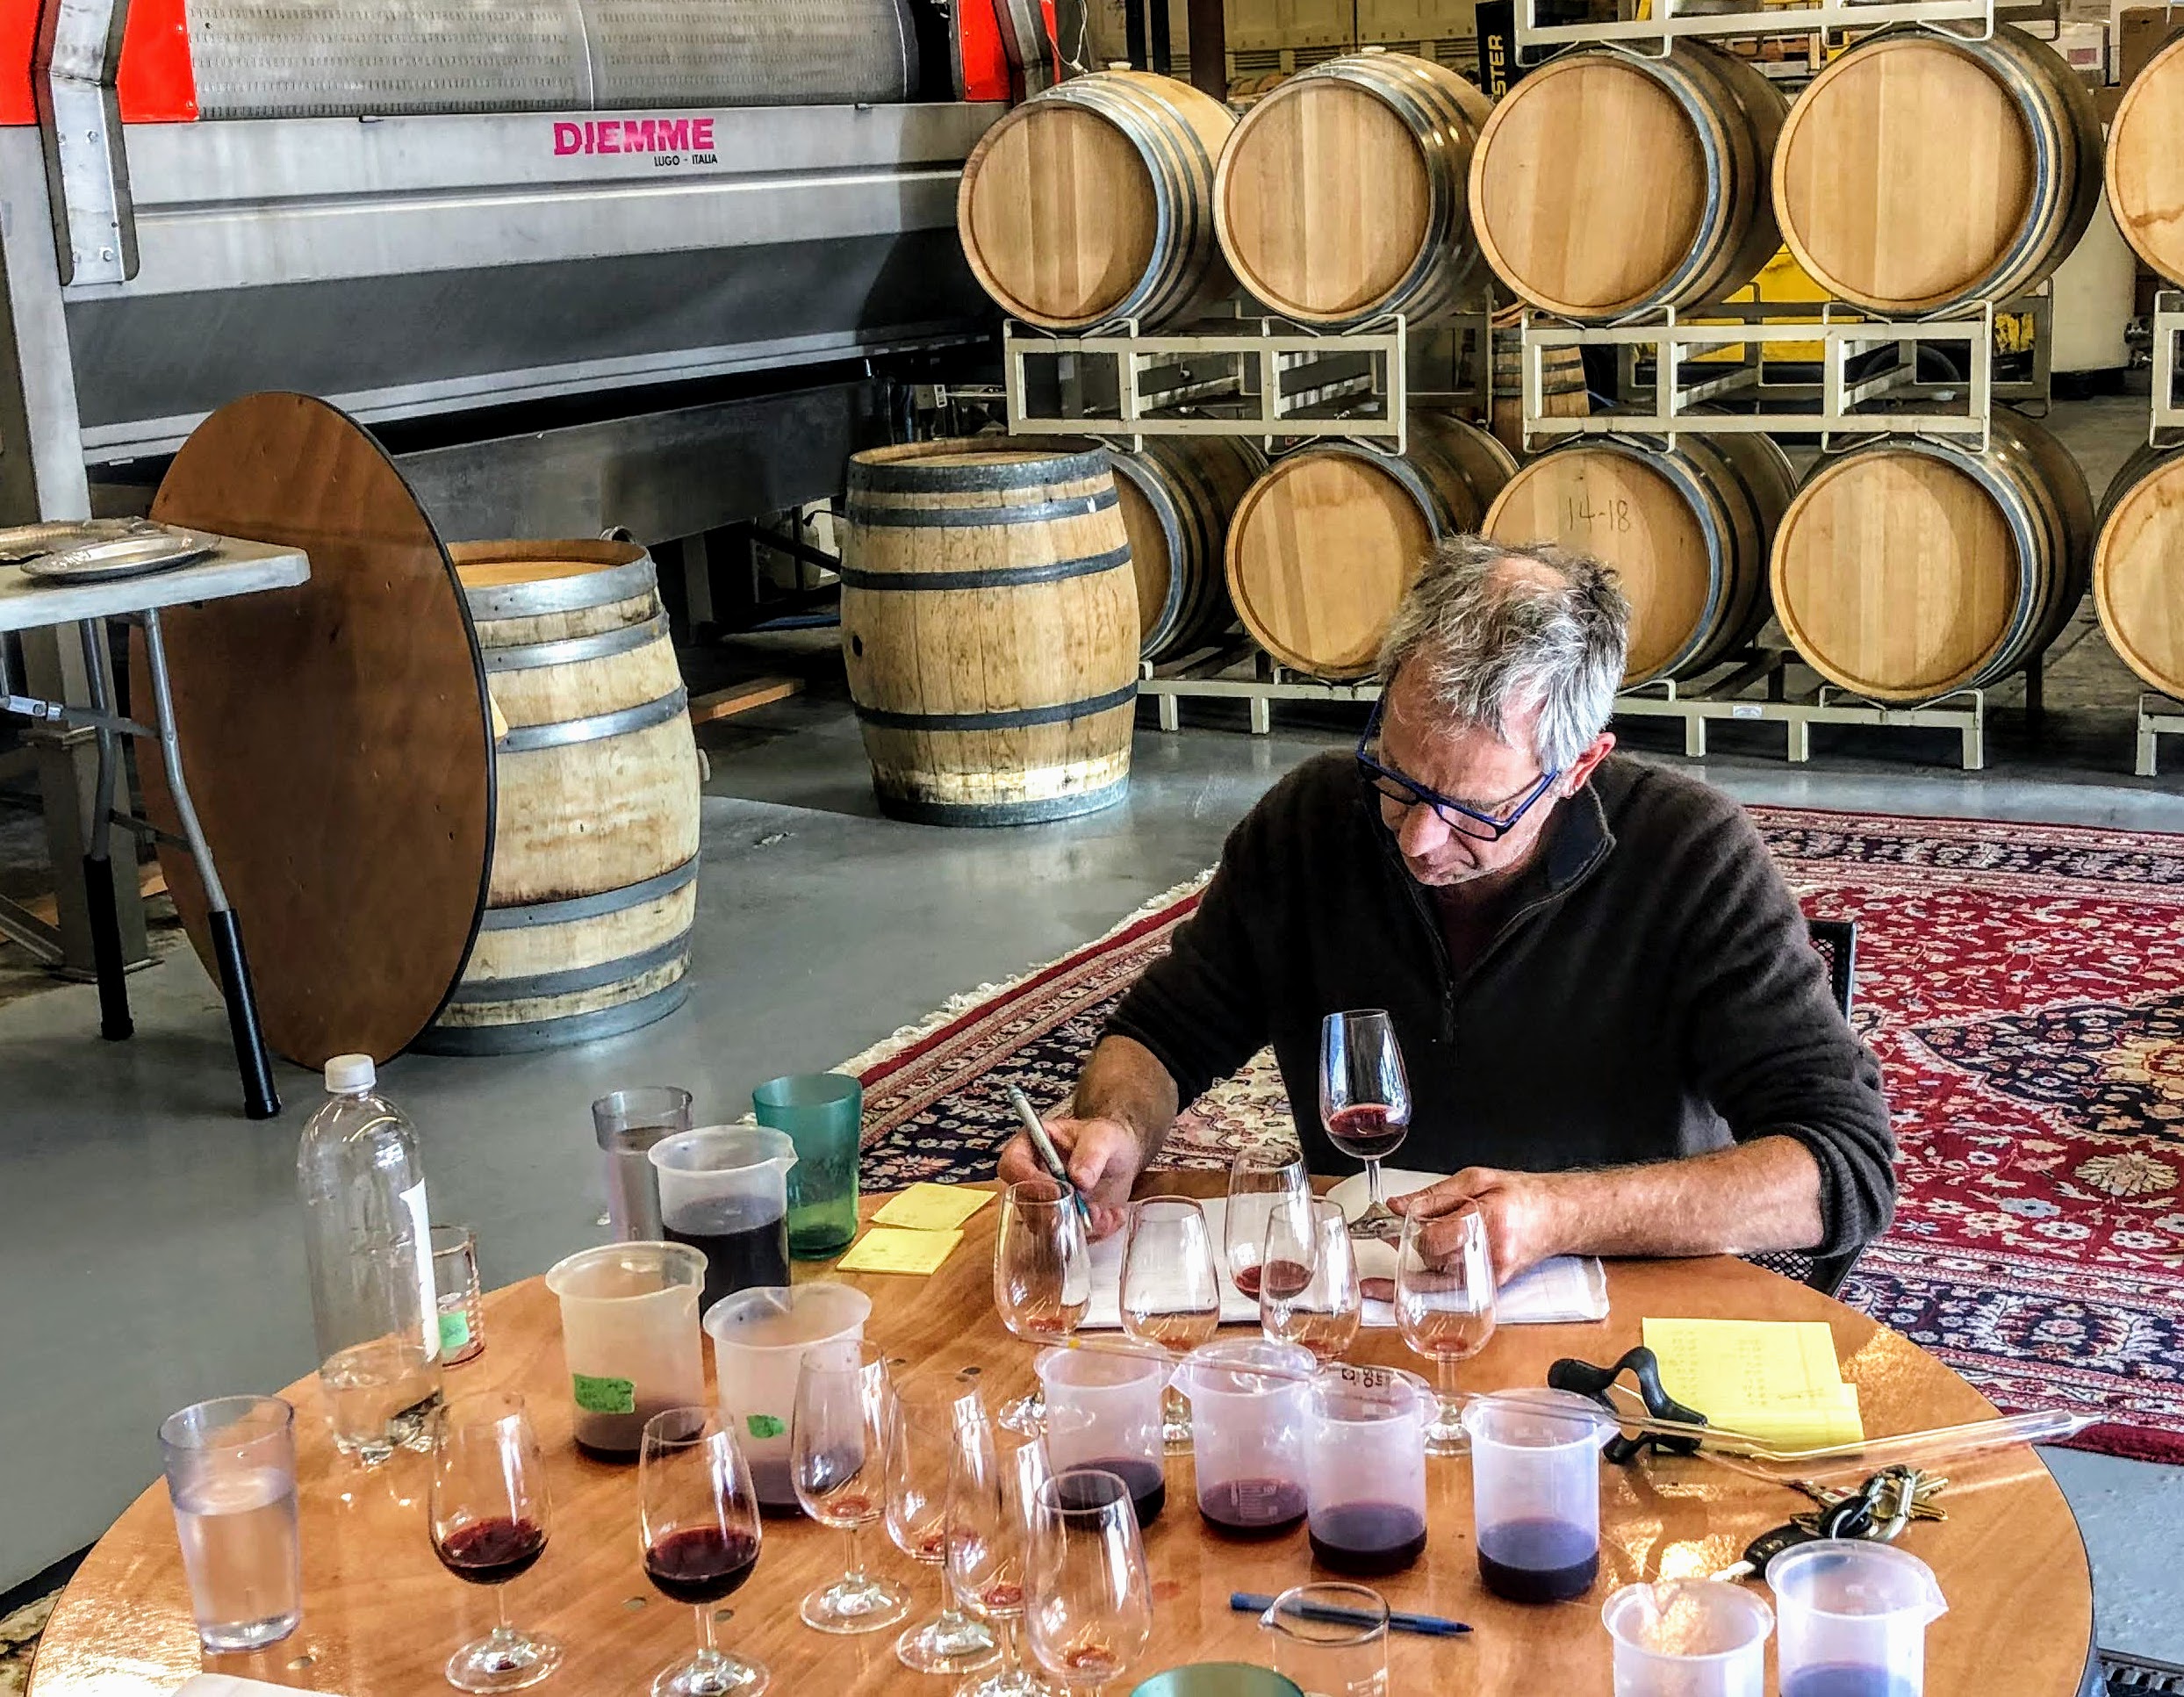 A winemaker takes notes while sitting at a table in a winery barrel room. The table is covered with wine glasses and plastic containers holding barrel samples of different red wines.